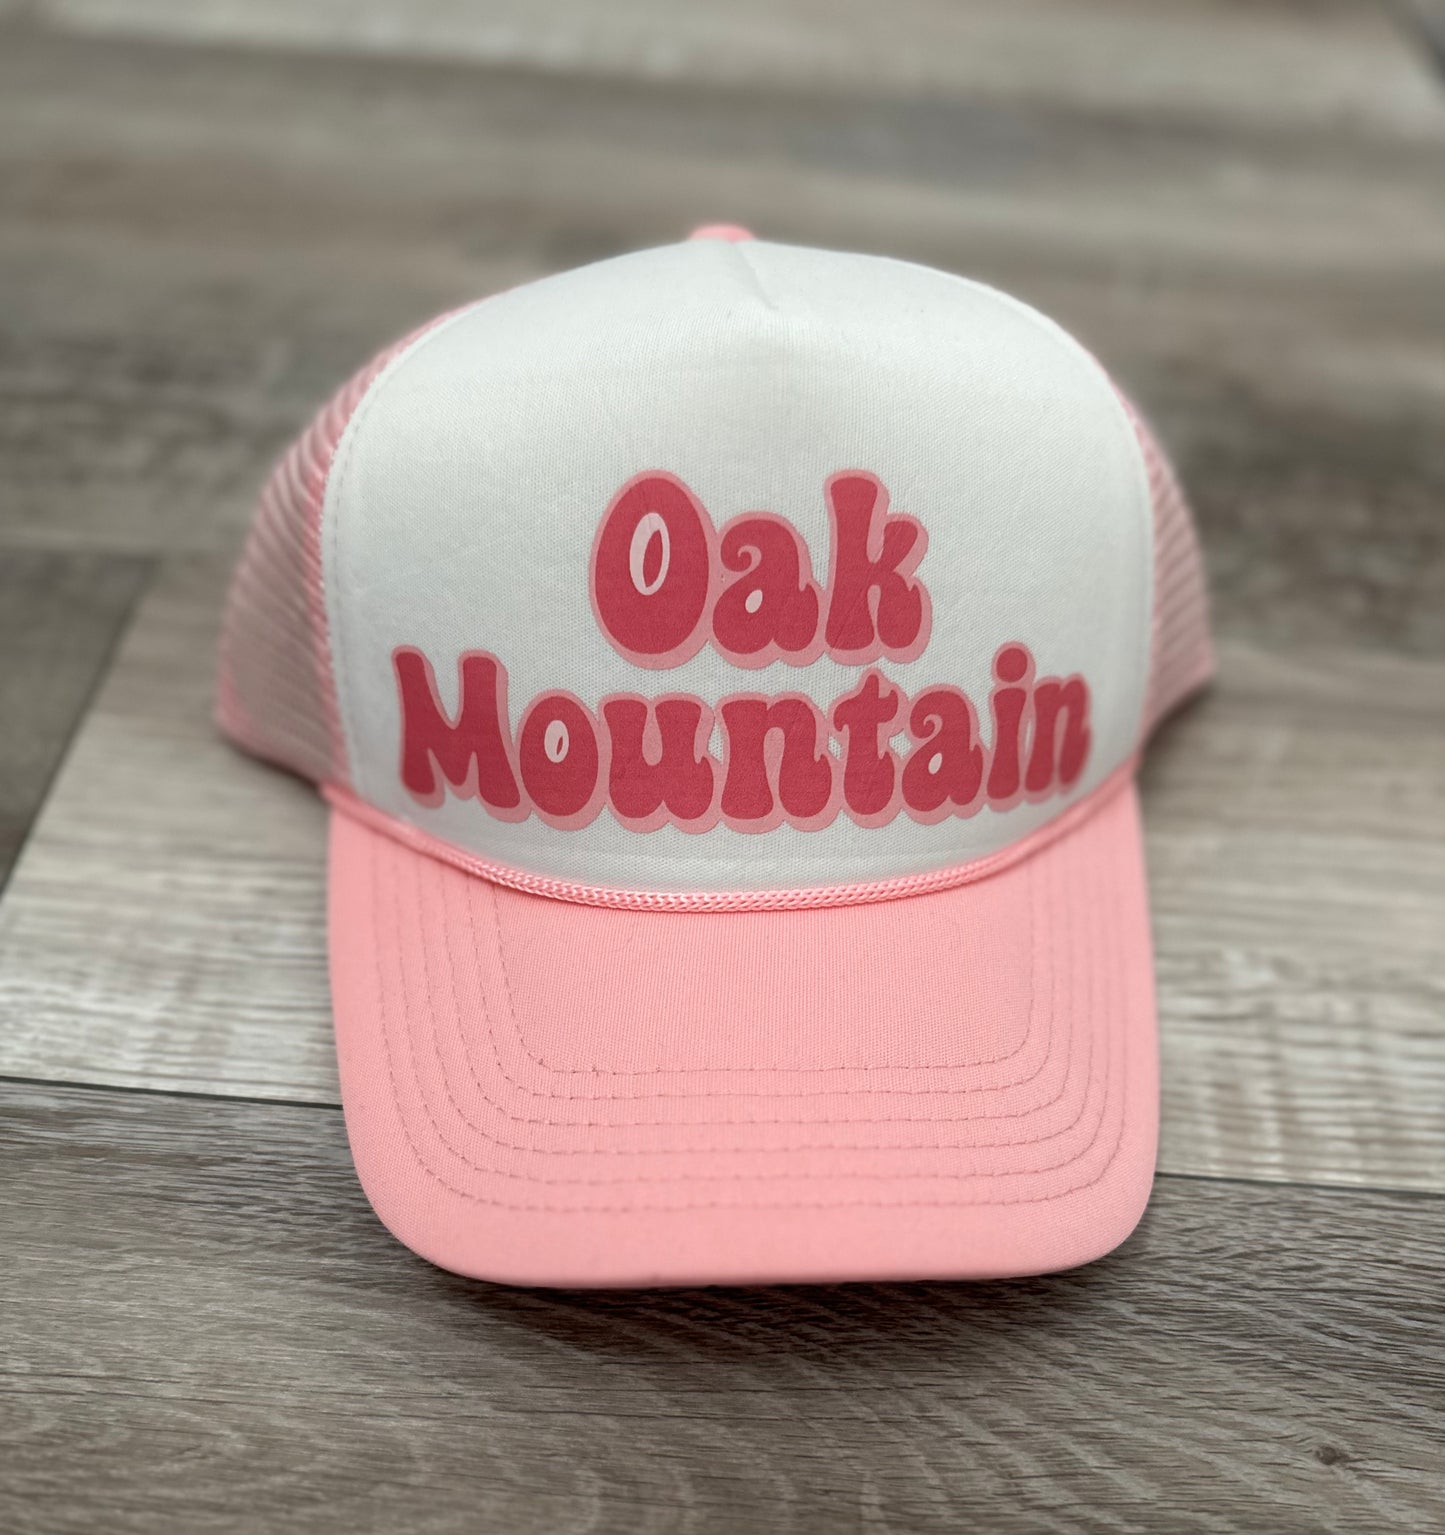 Not Just your average Trucker Hat